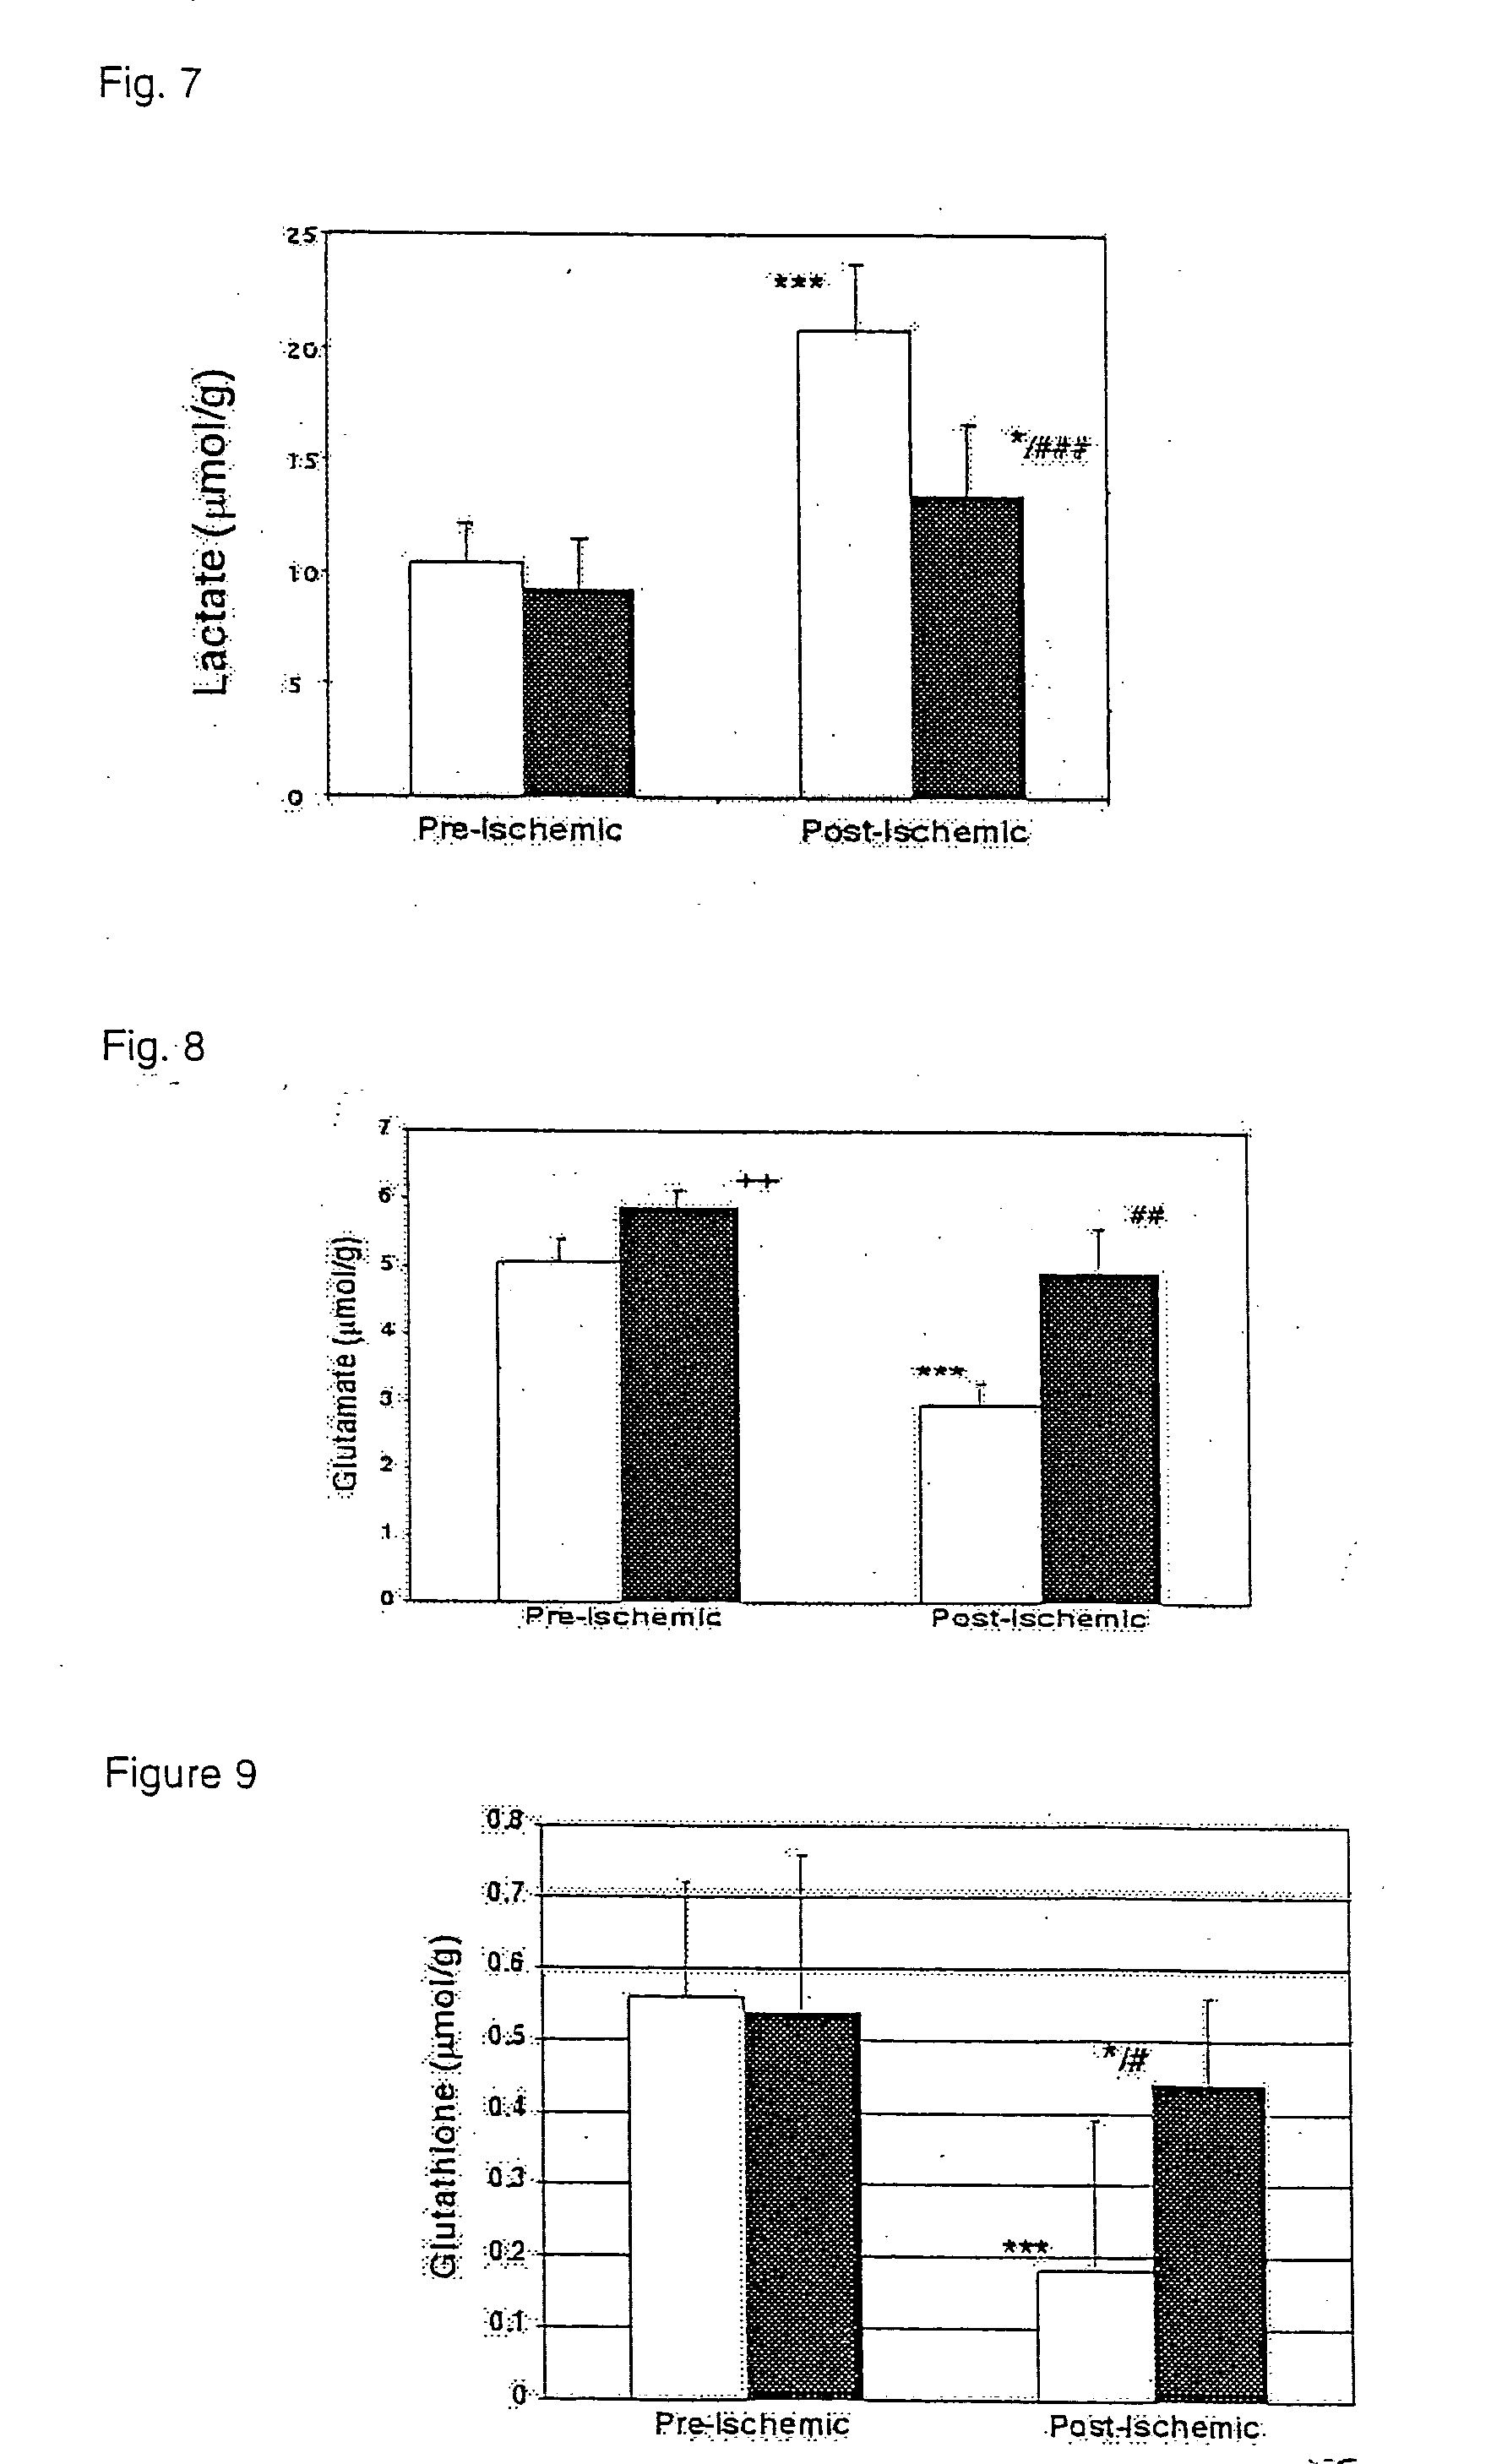 Glutamine for use in treating injury